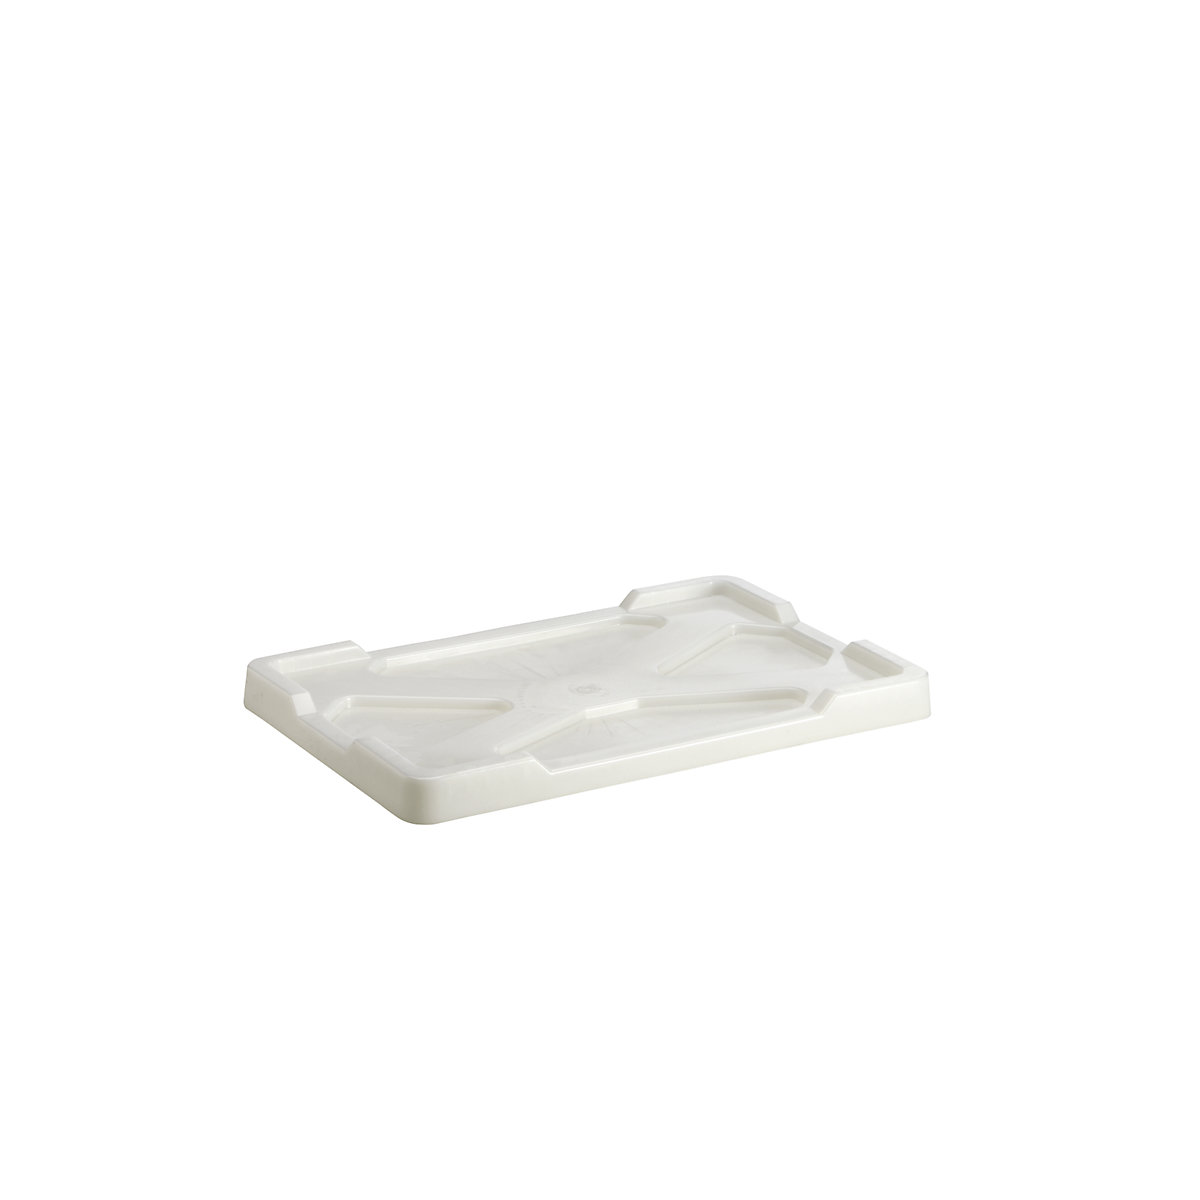 Dust protection lid, white